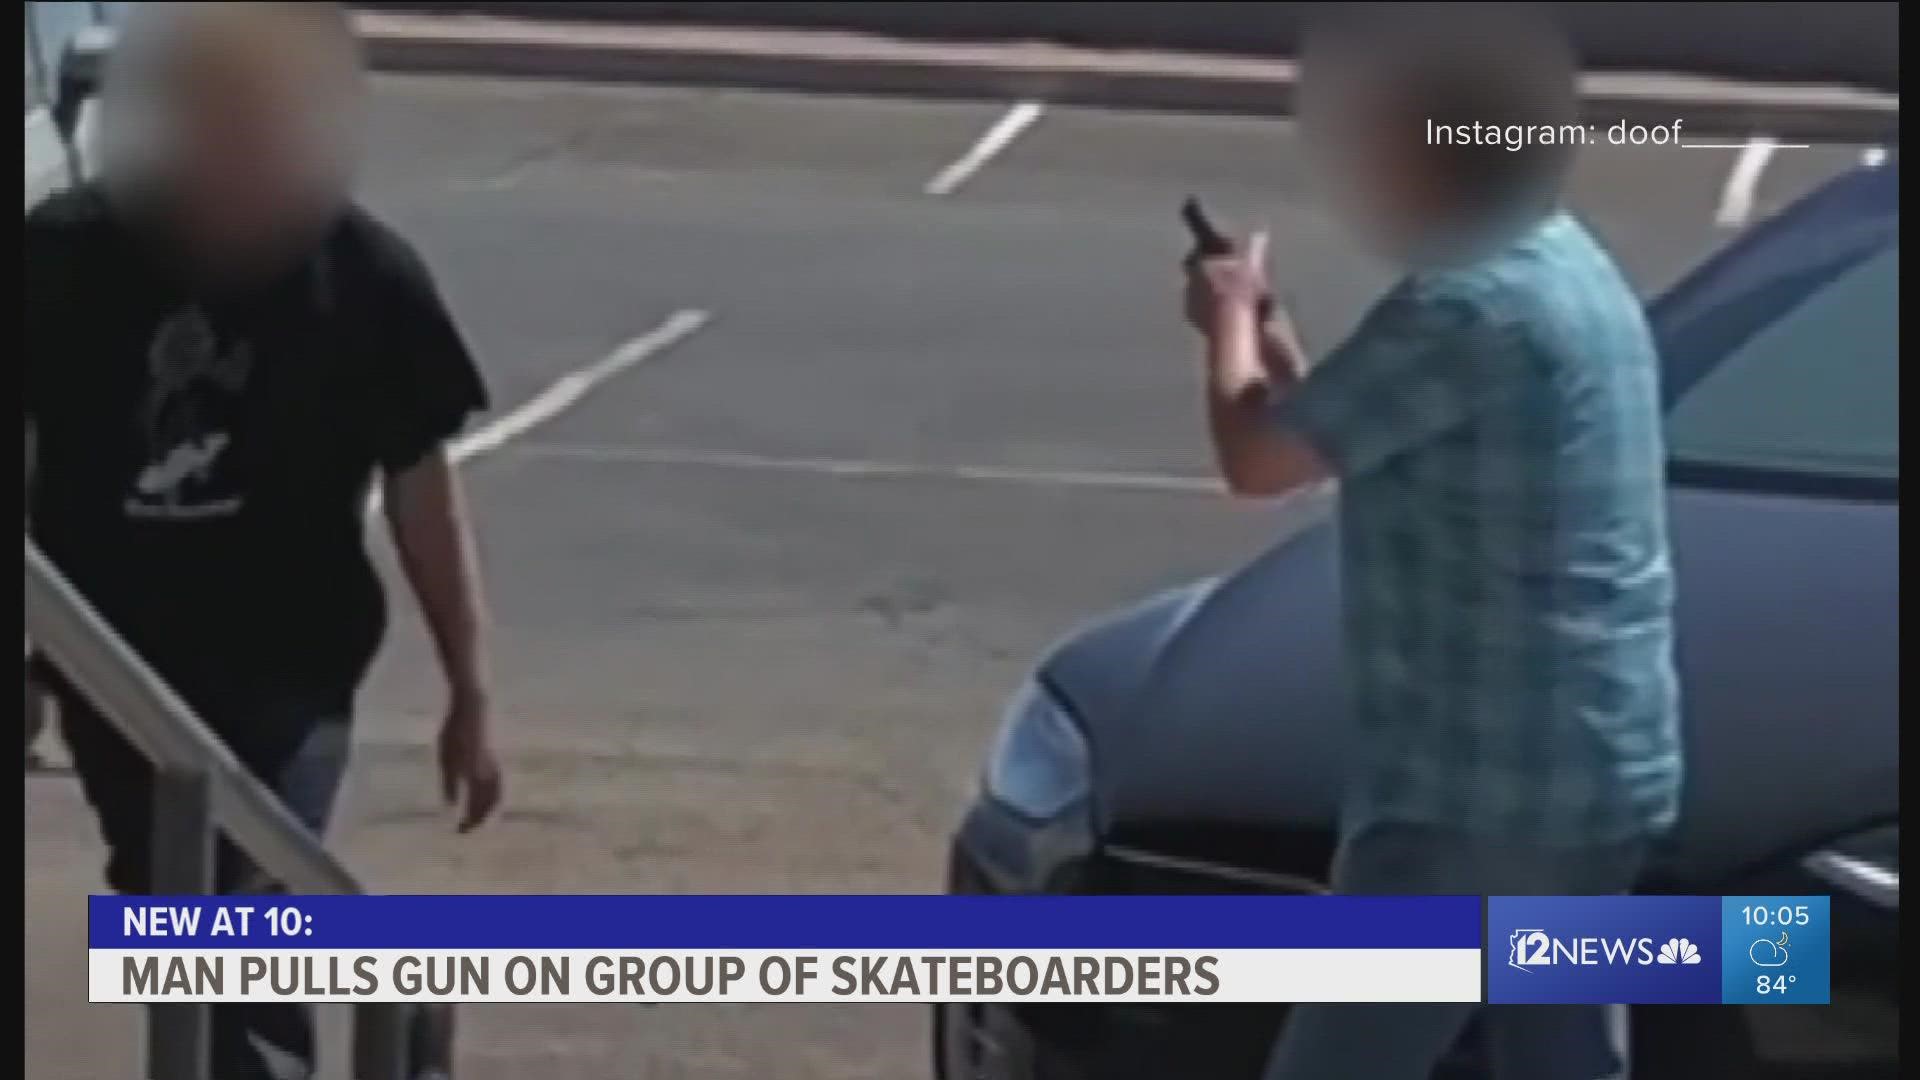 Video shows a group of skateboarders at Compassion Church in Gilbert. A man parks in front of them, pulls a handgun and asks them to leave.